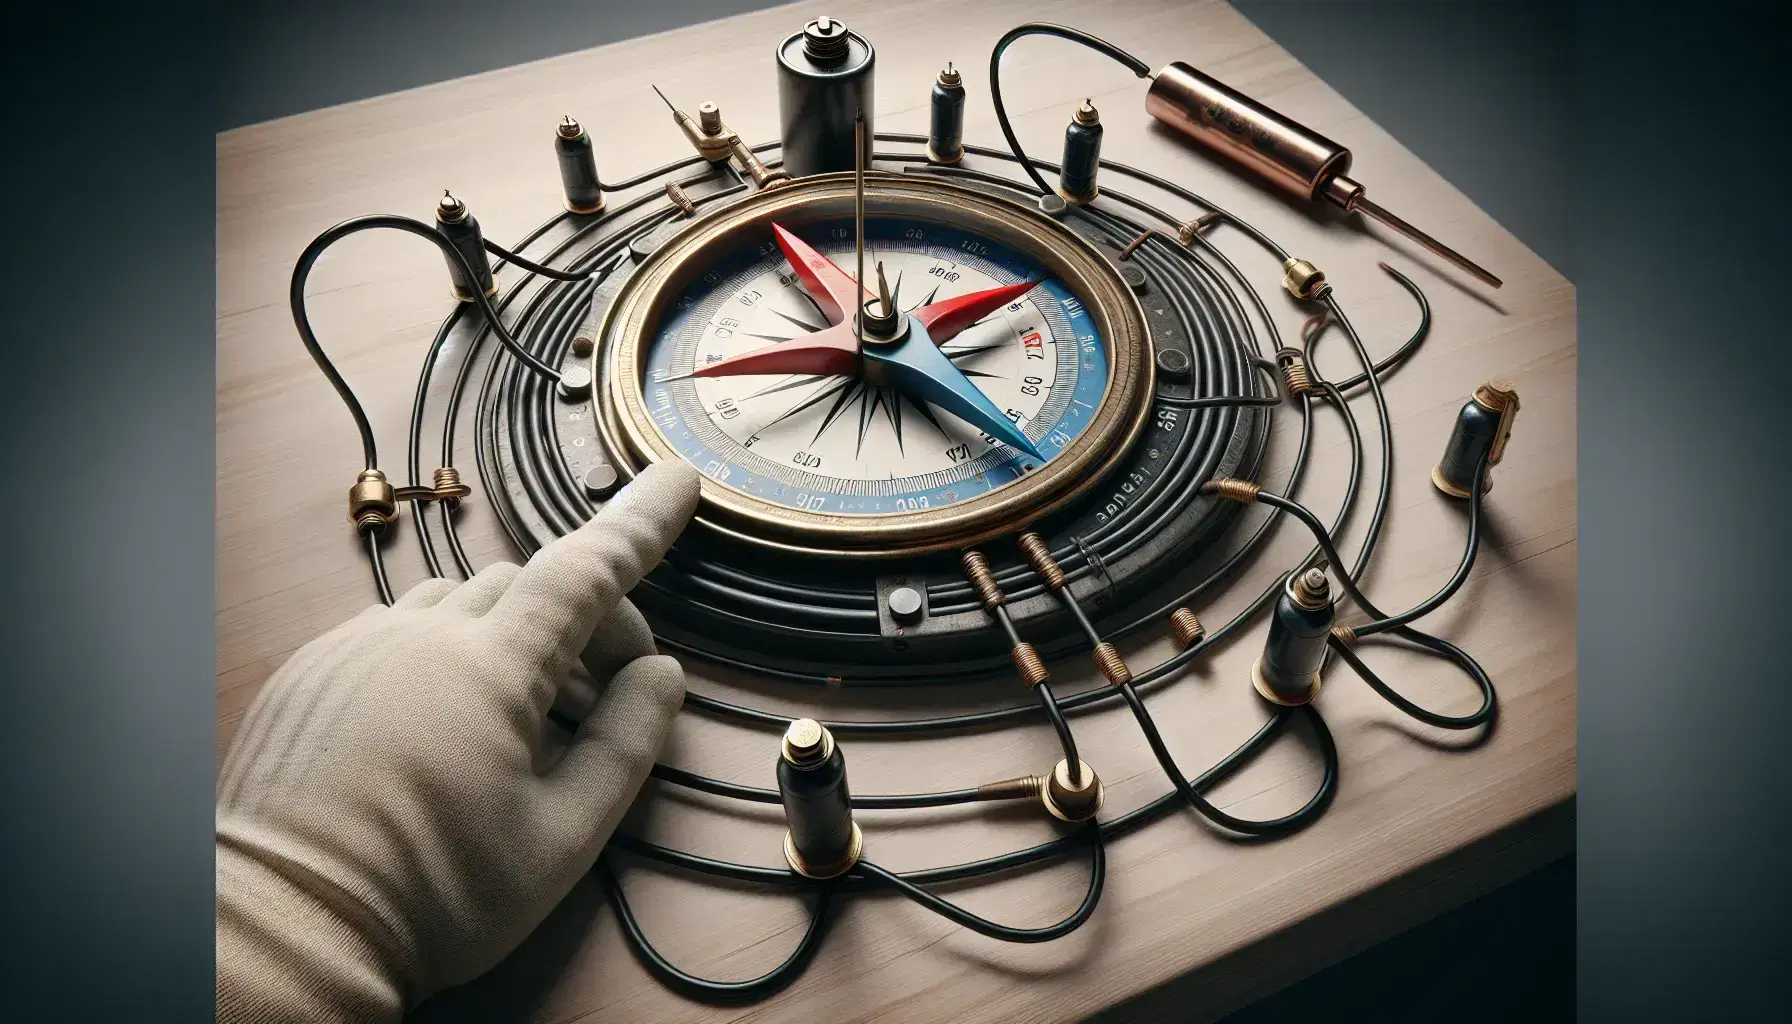 Compass with red-blue needle surrounded by a wire loop connected to a battery, with a gloved hand about to complete the circuit on a wooden table.